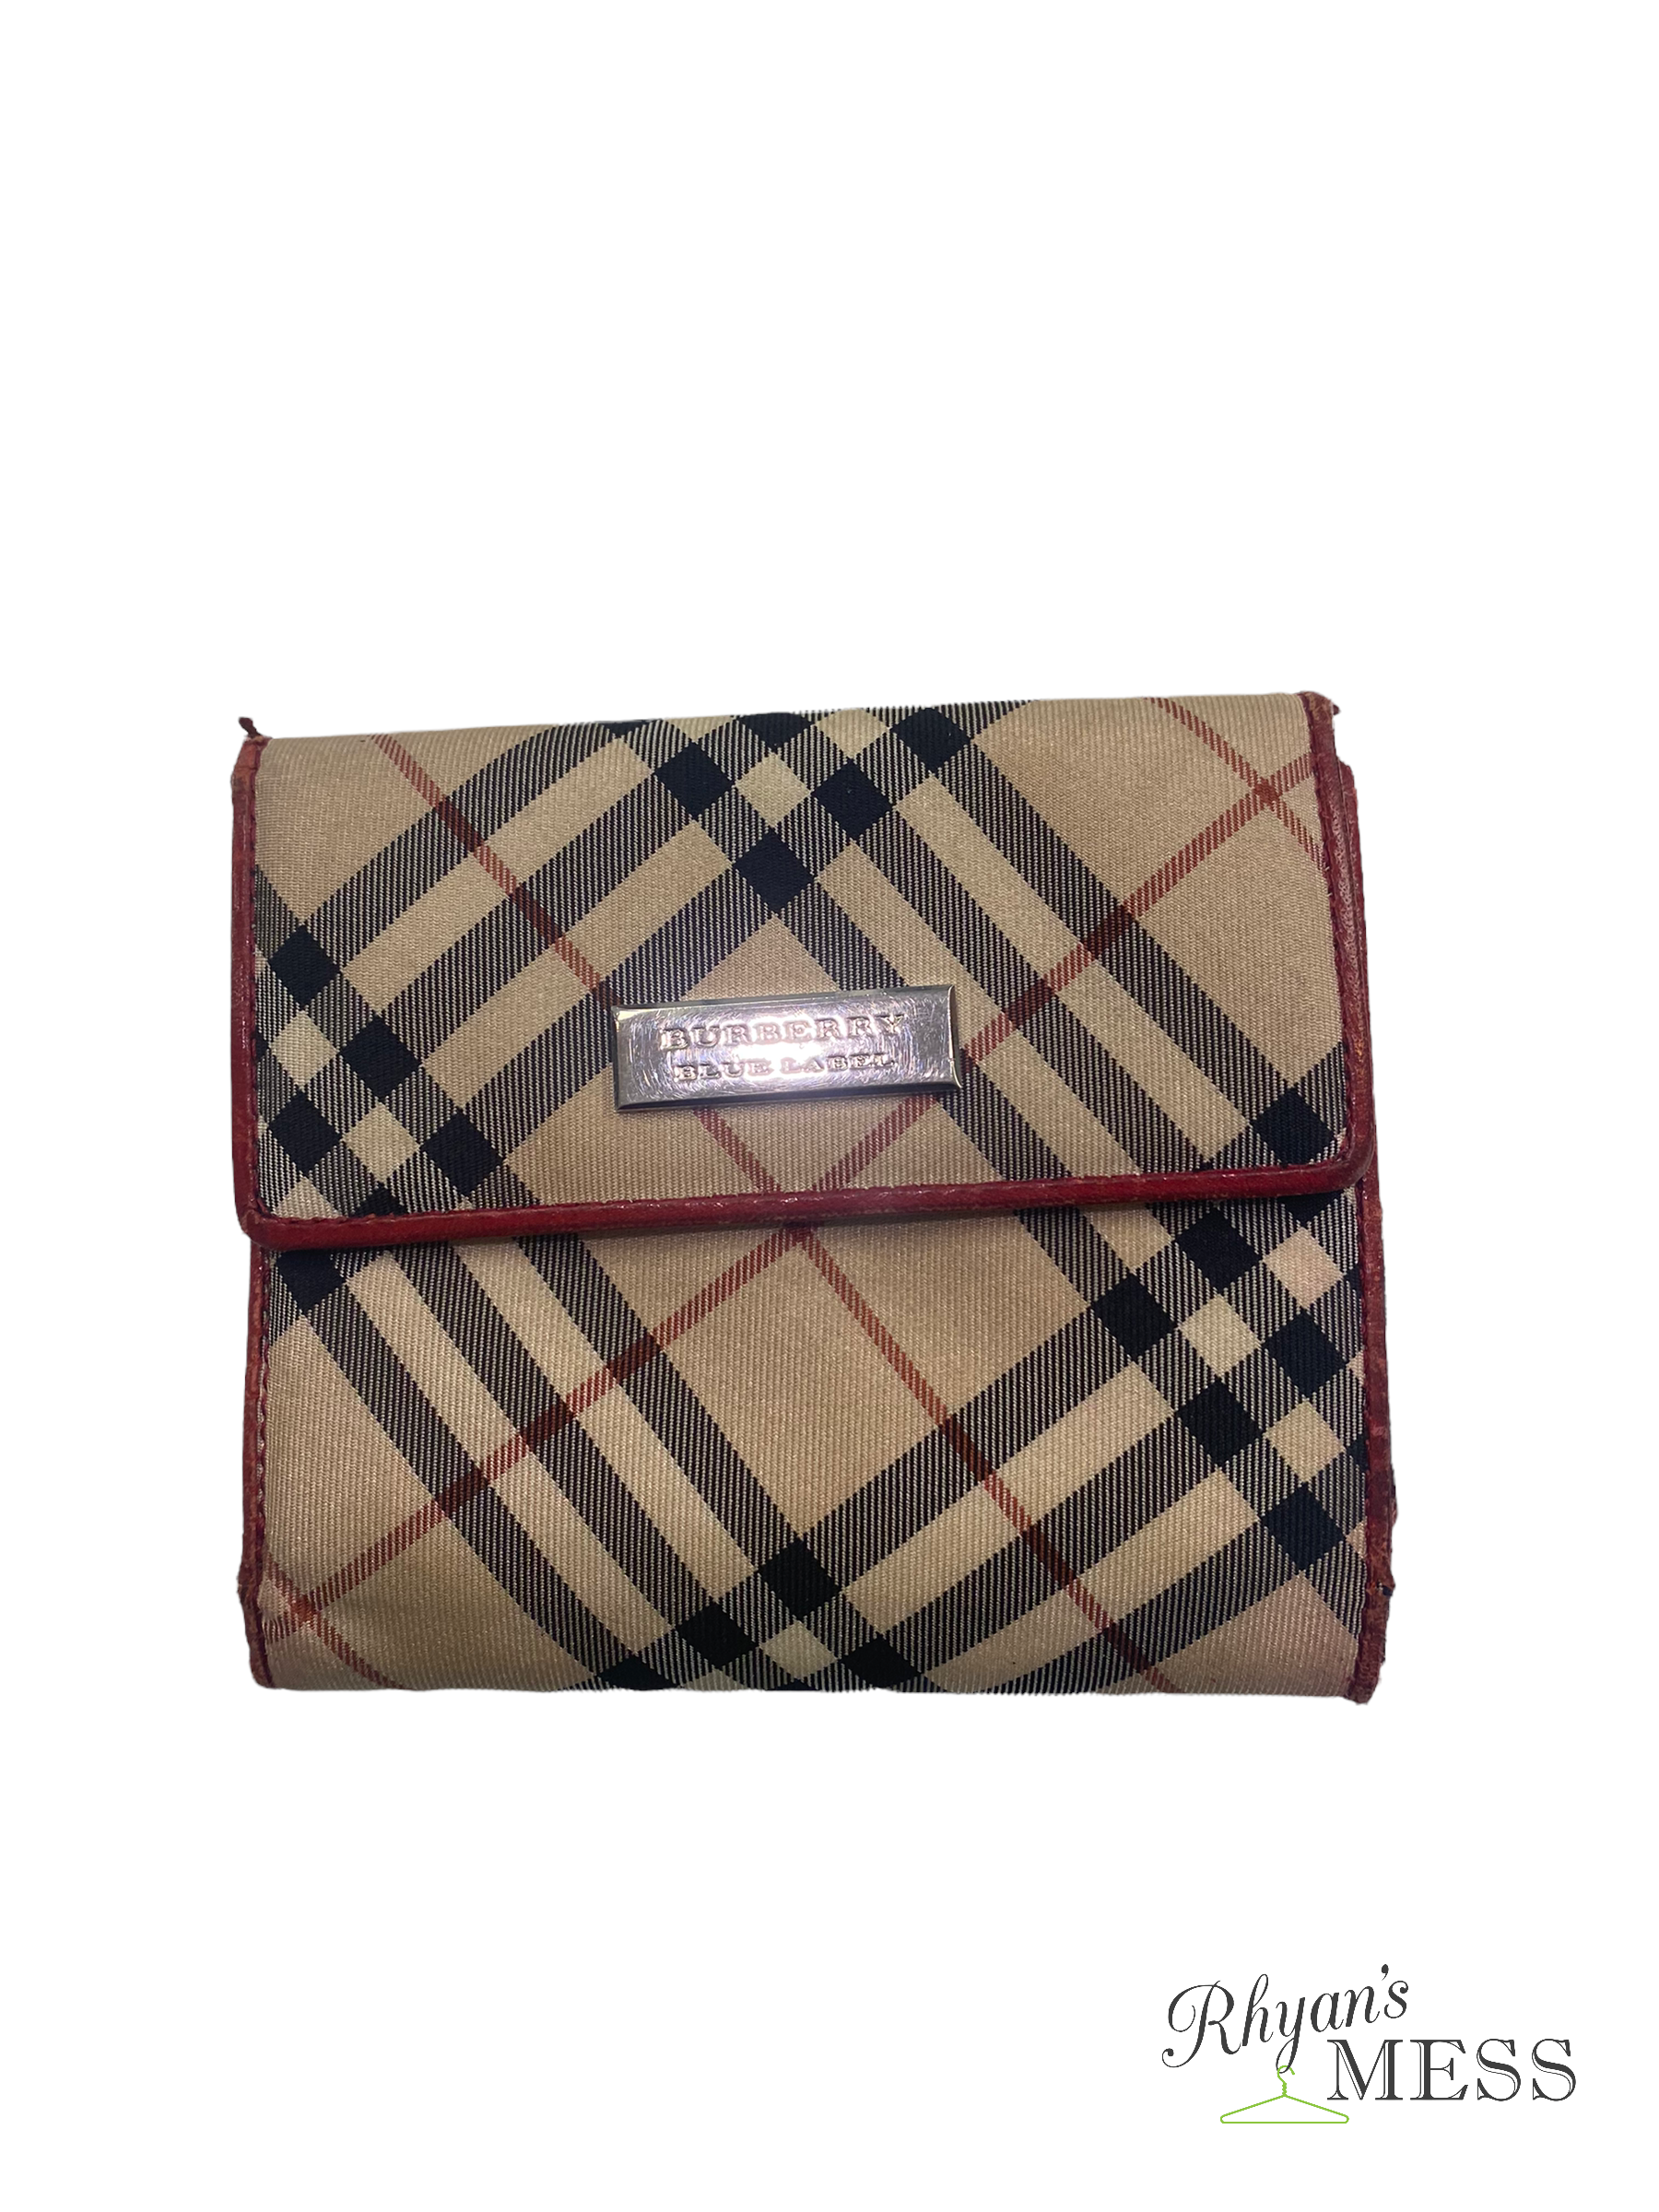 Burberry wallet
some minor scratches on inside
red leather interior
everyday wear on outside
vintage piece